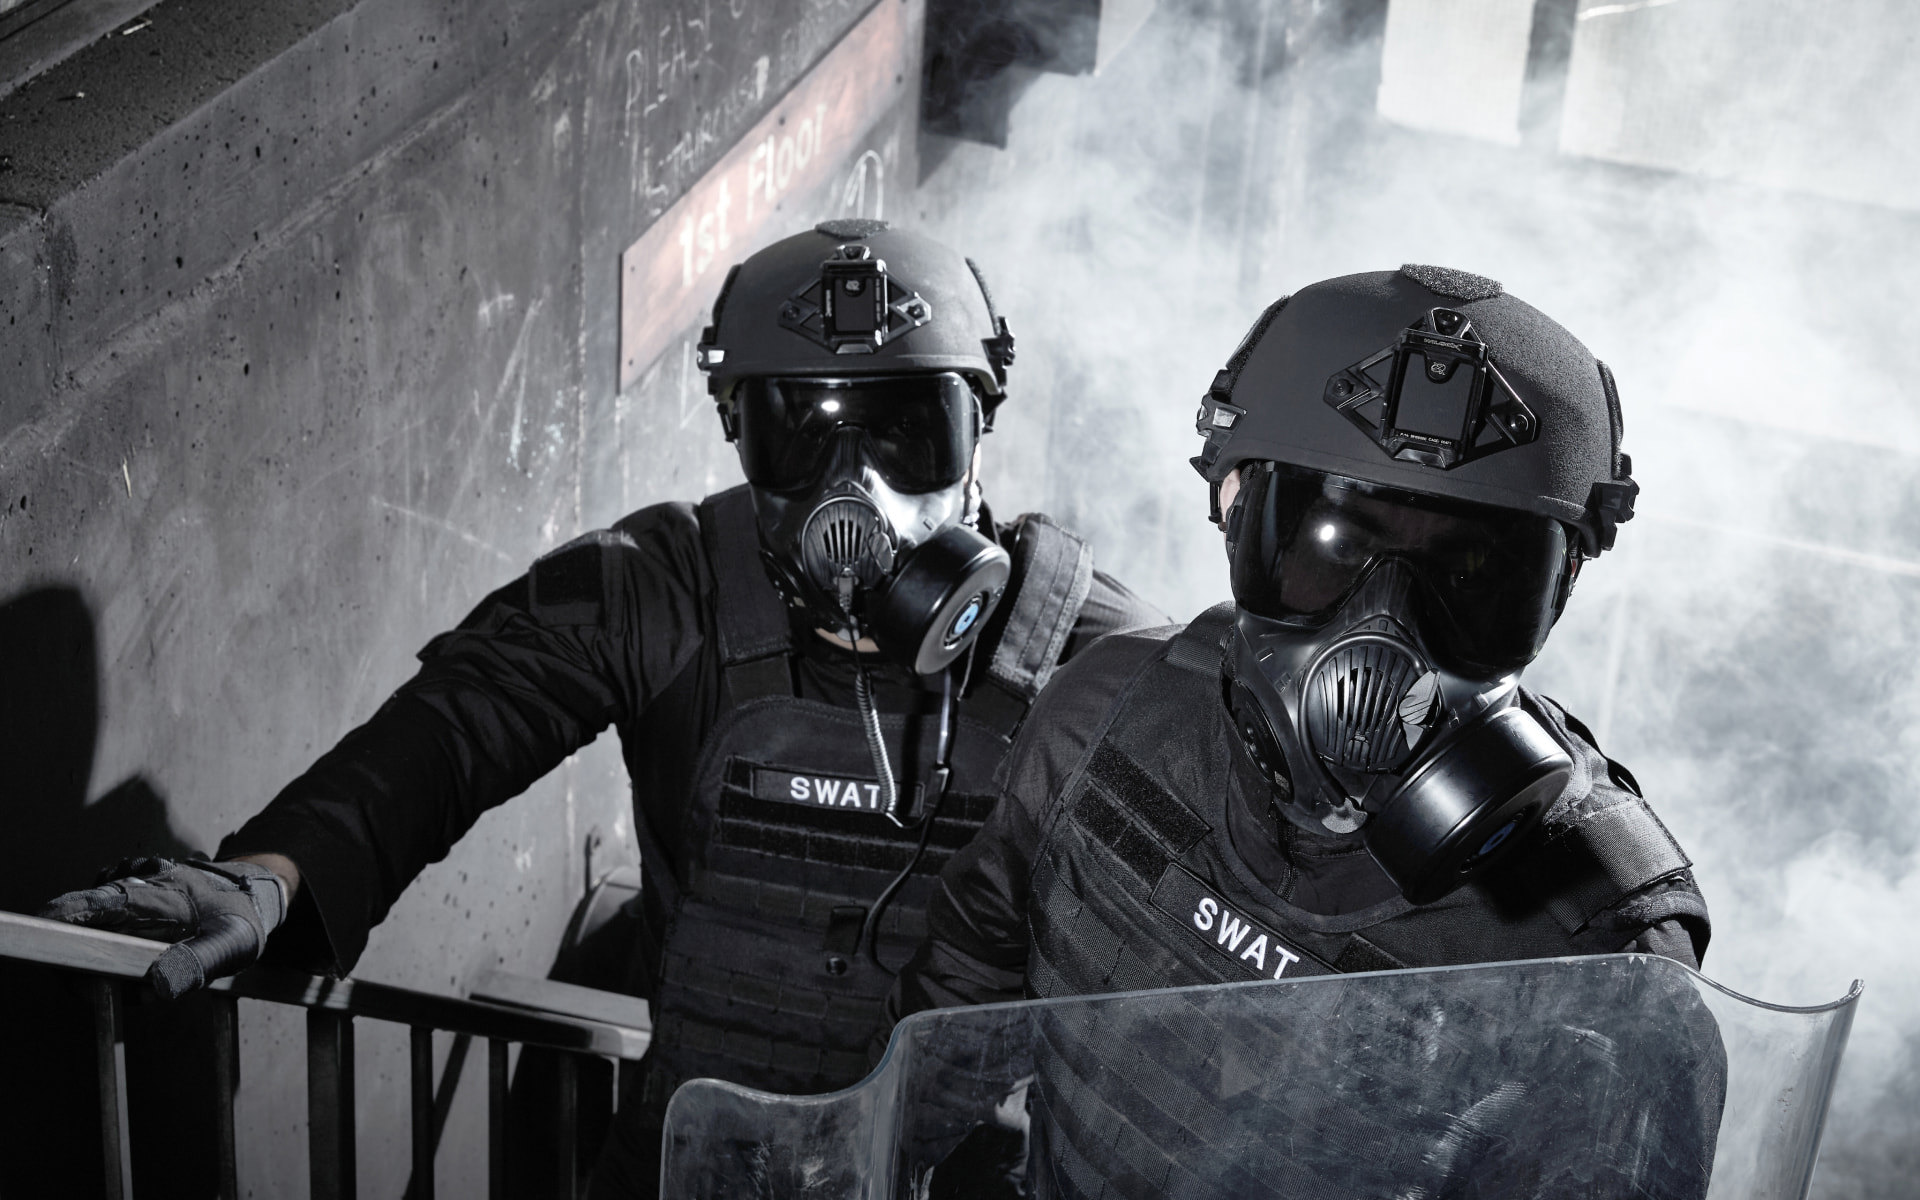 Two soldiers on staircase wearing ballistic helmets and respirators